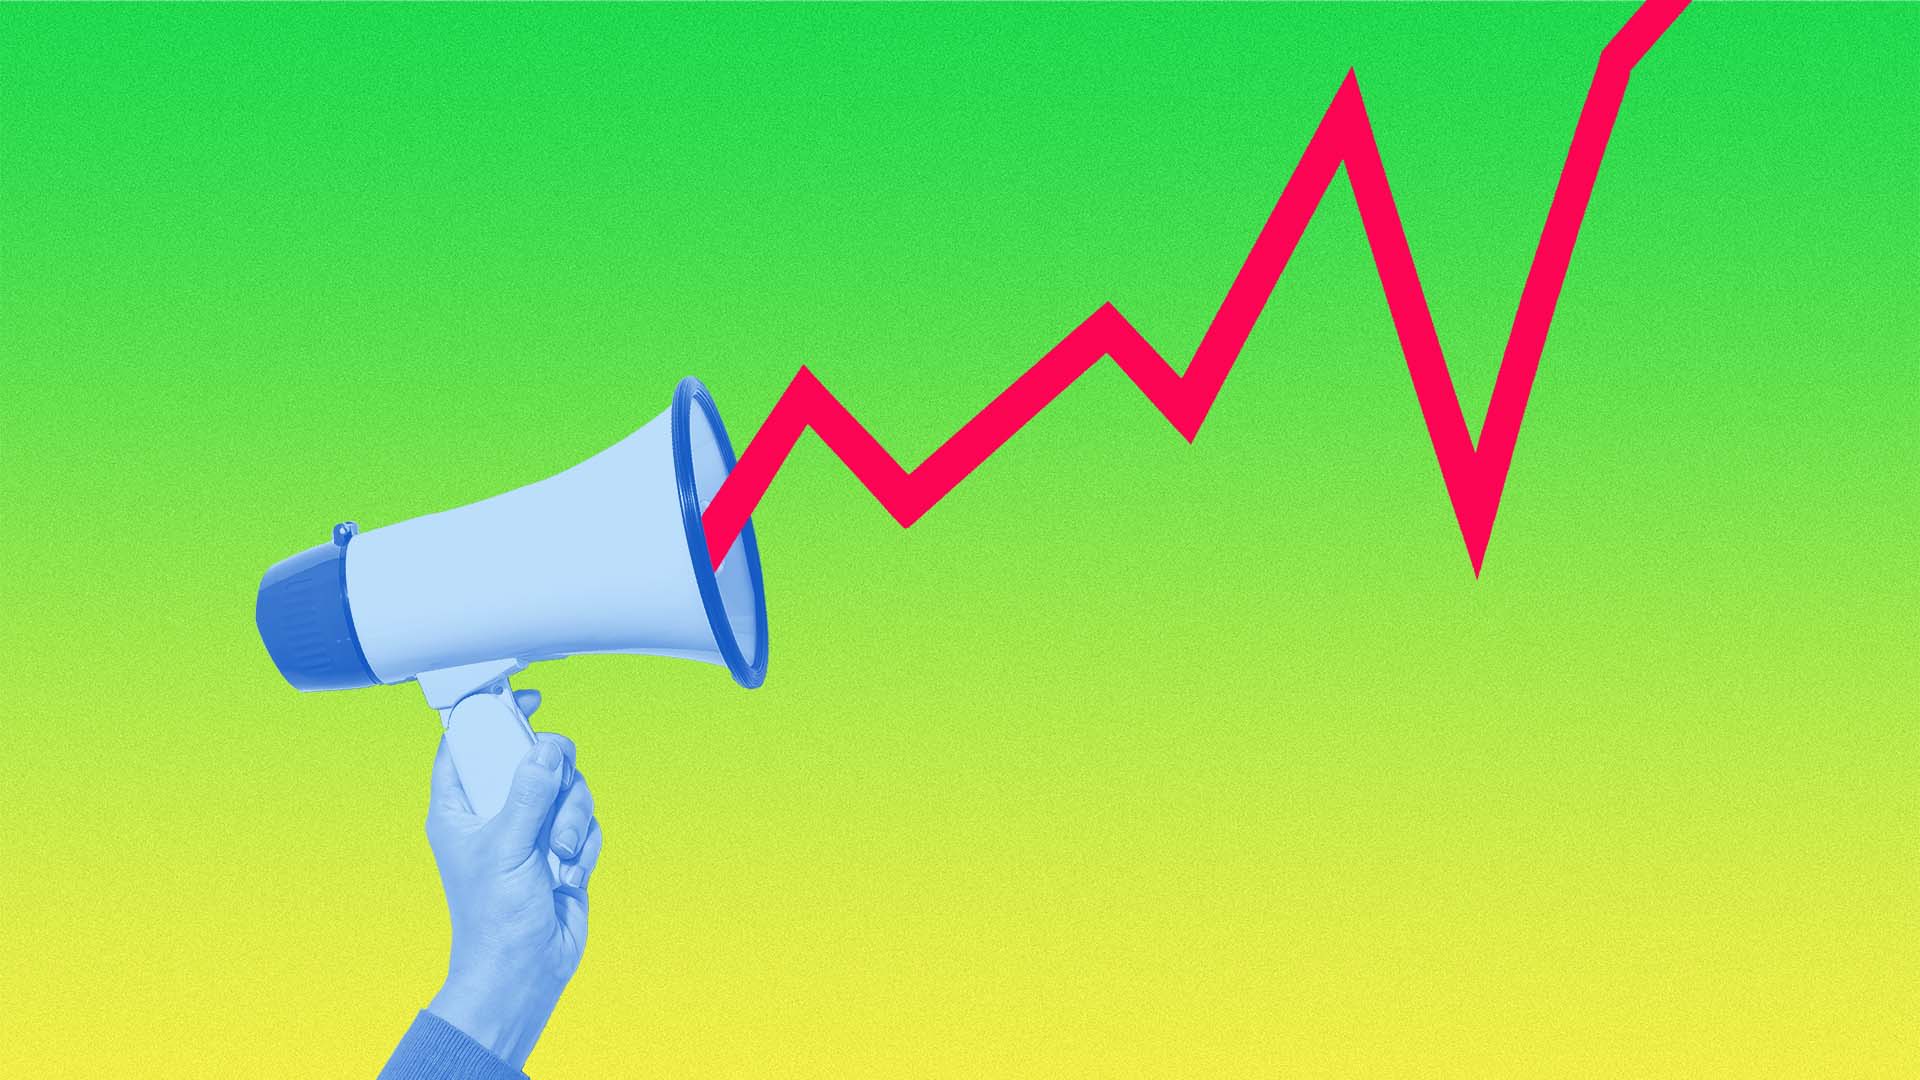 With Still High Inflation, Raising Prices May Be Inevitable. How to Go About Communicating the Hike